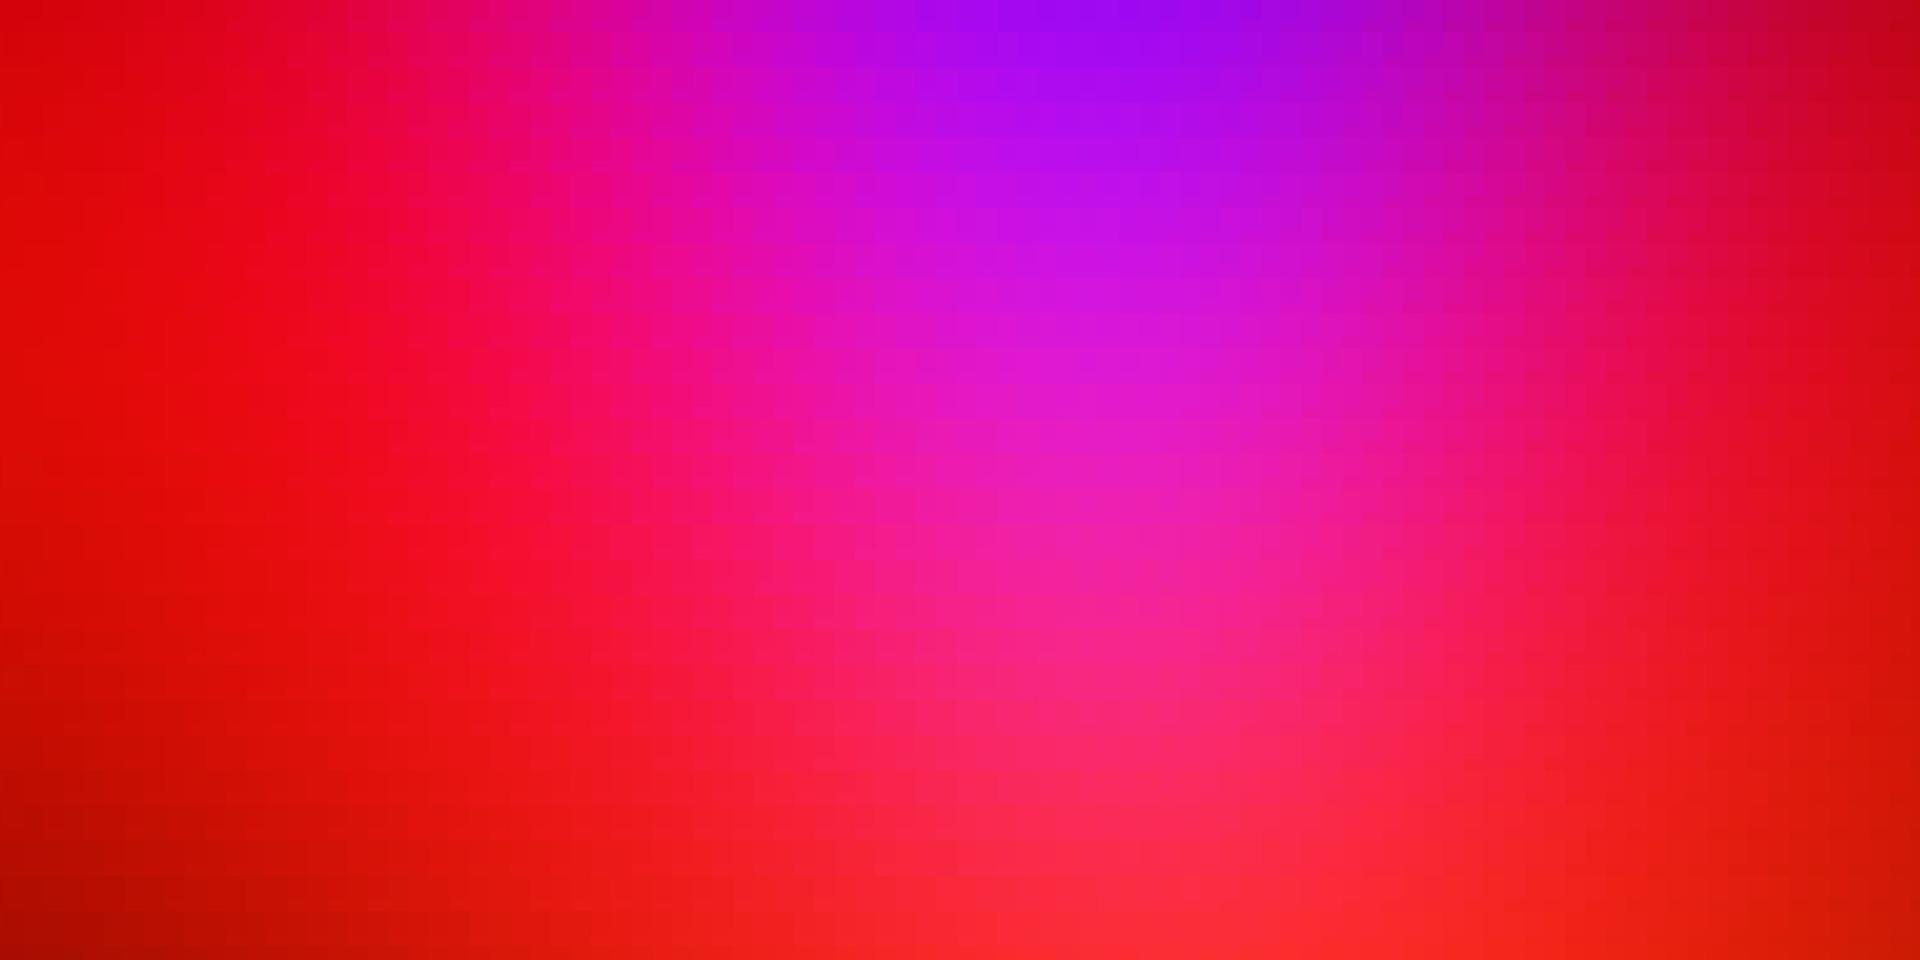 Colorful vector abstract background with gradient